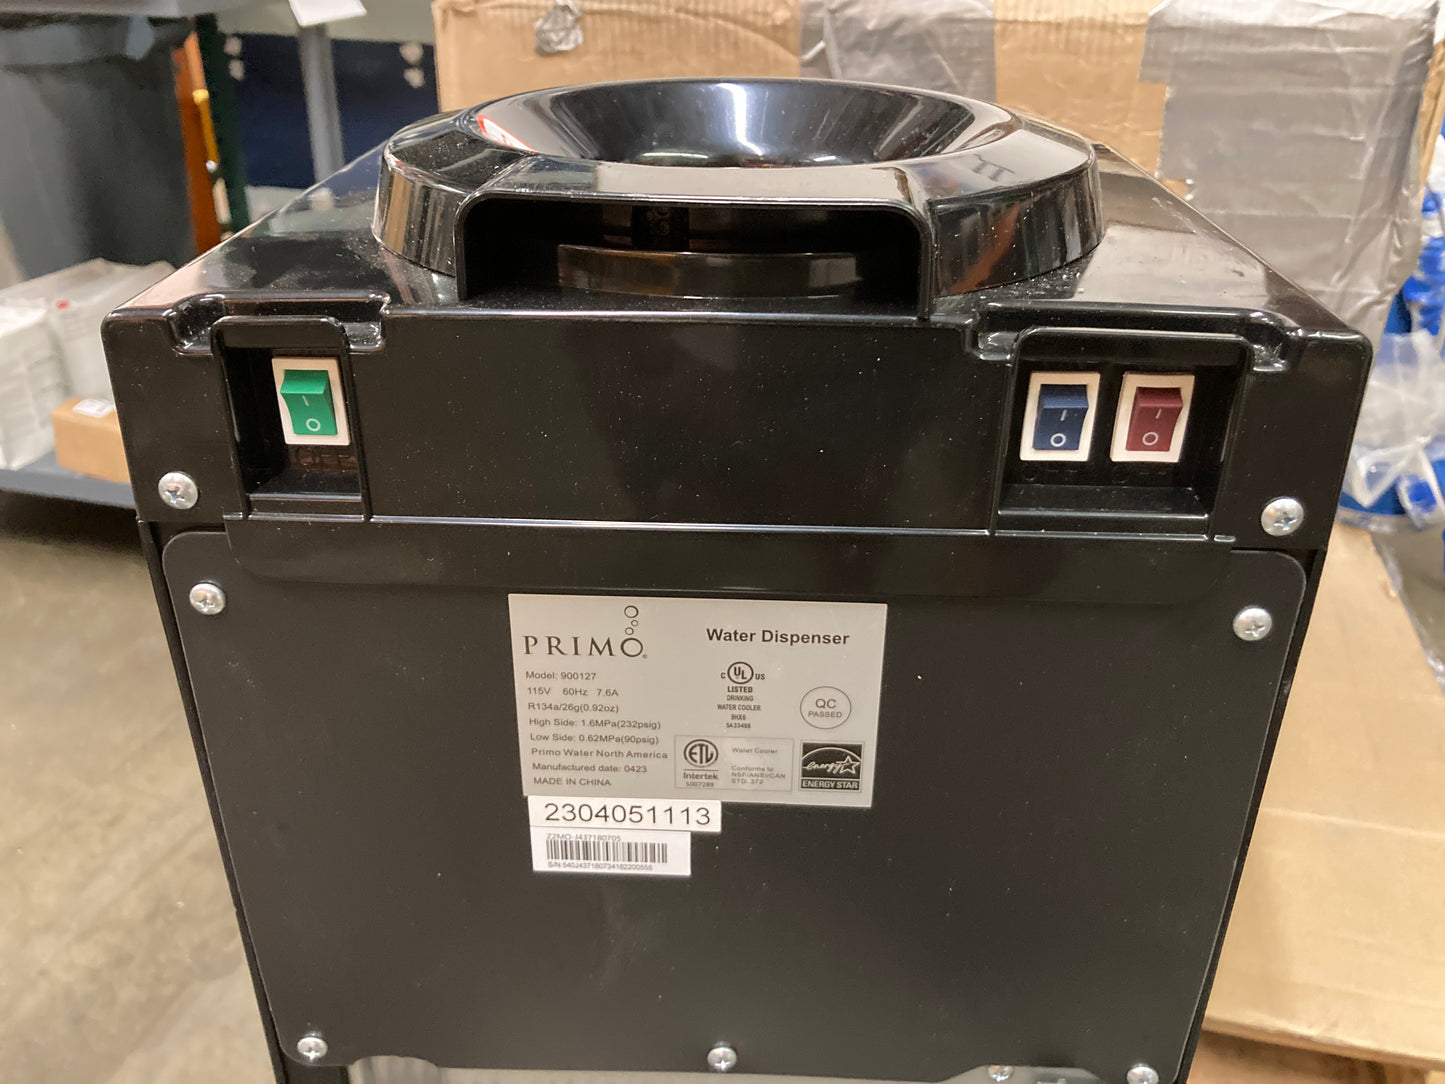 Costco - Primo Water Cooler Top Loading - Retail $179 Default Title